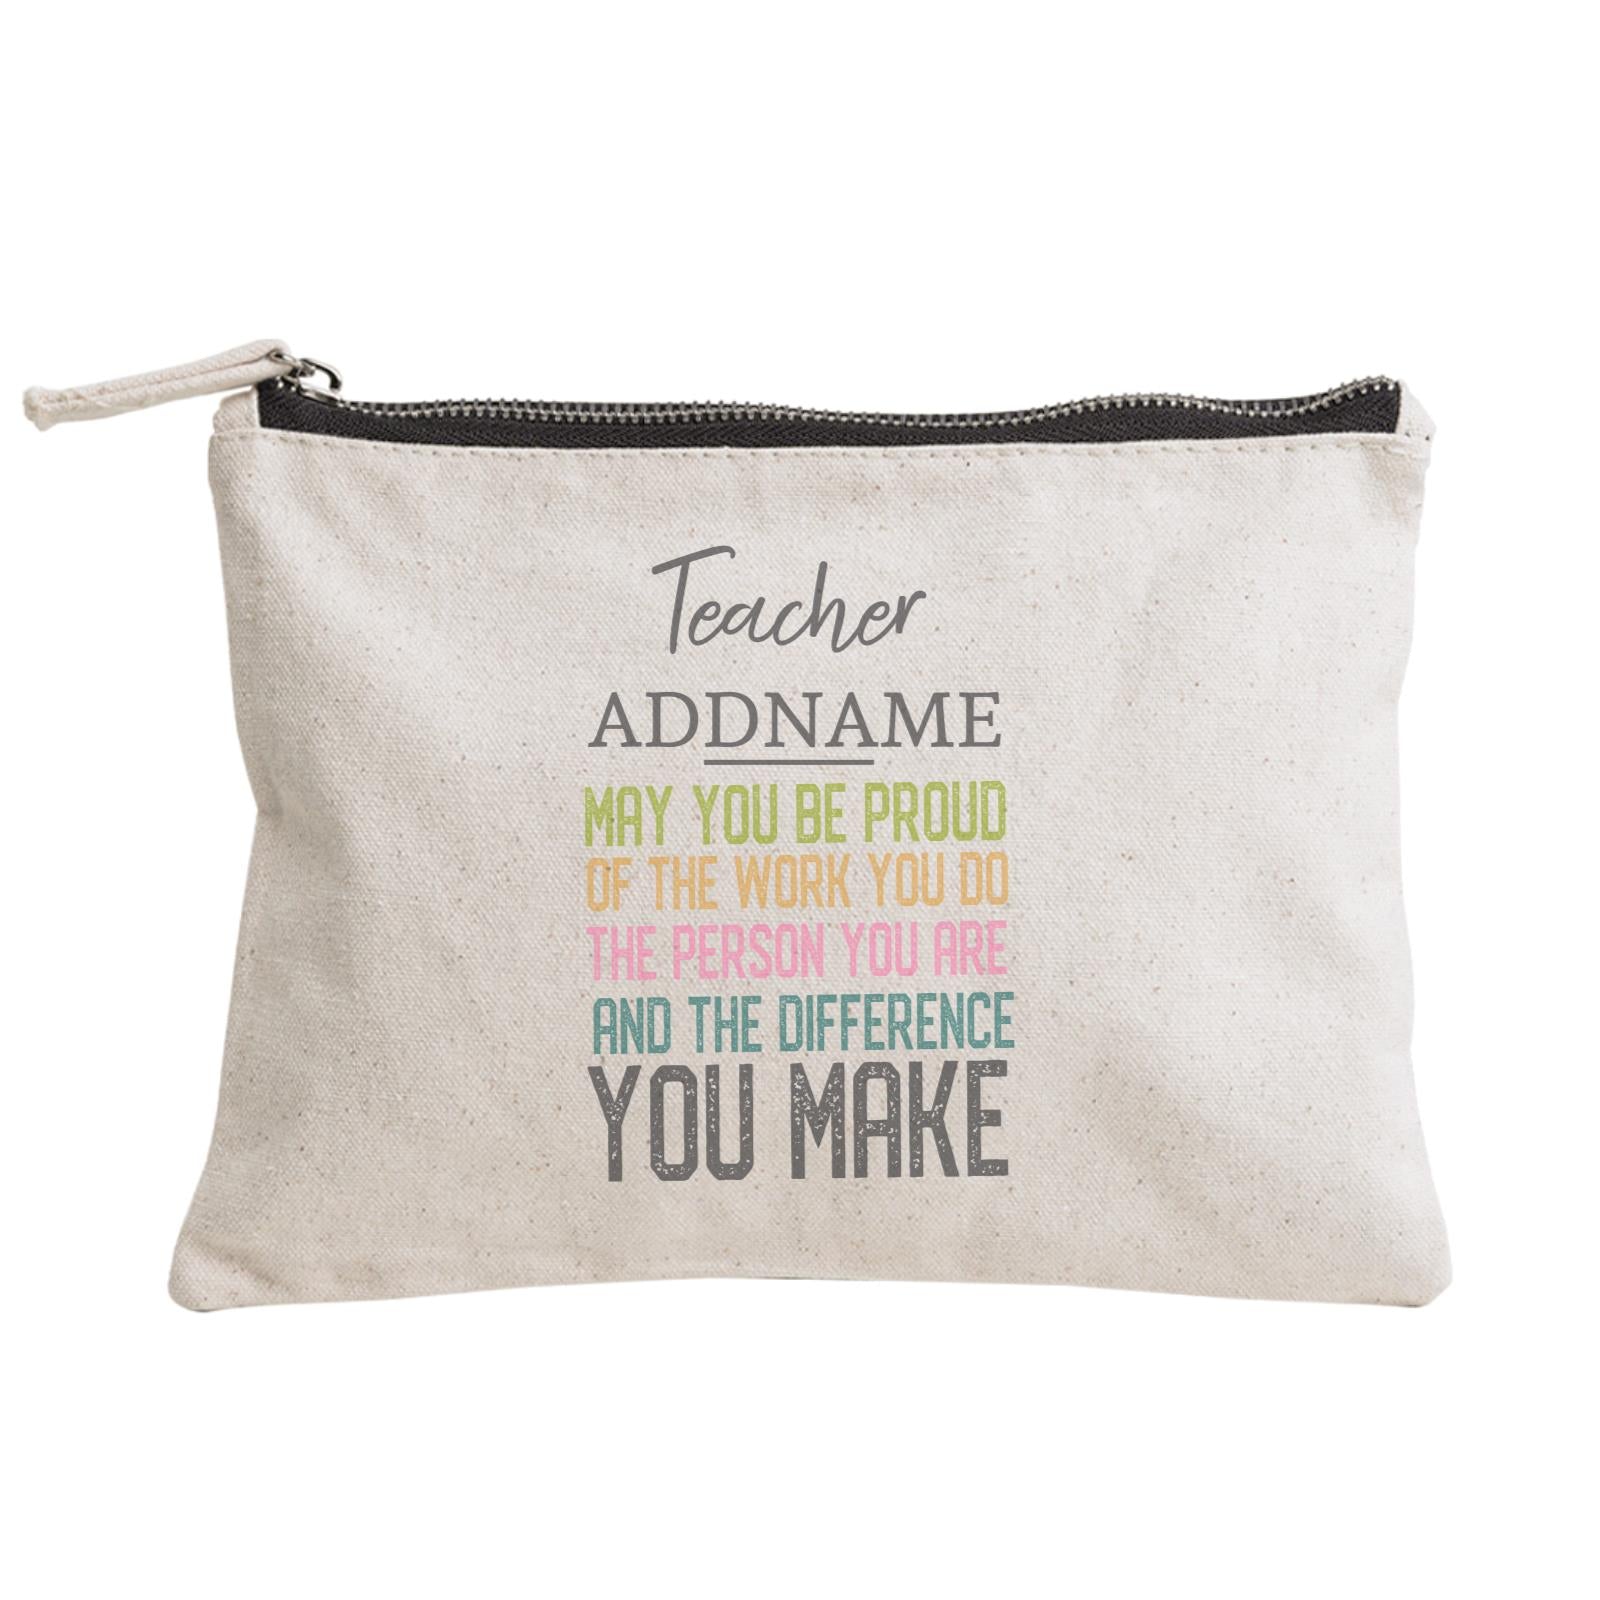 Teacher Addname May You Be Proud And Difference You Make Zipper